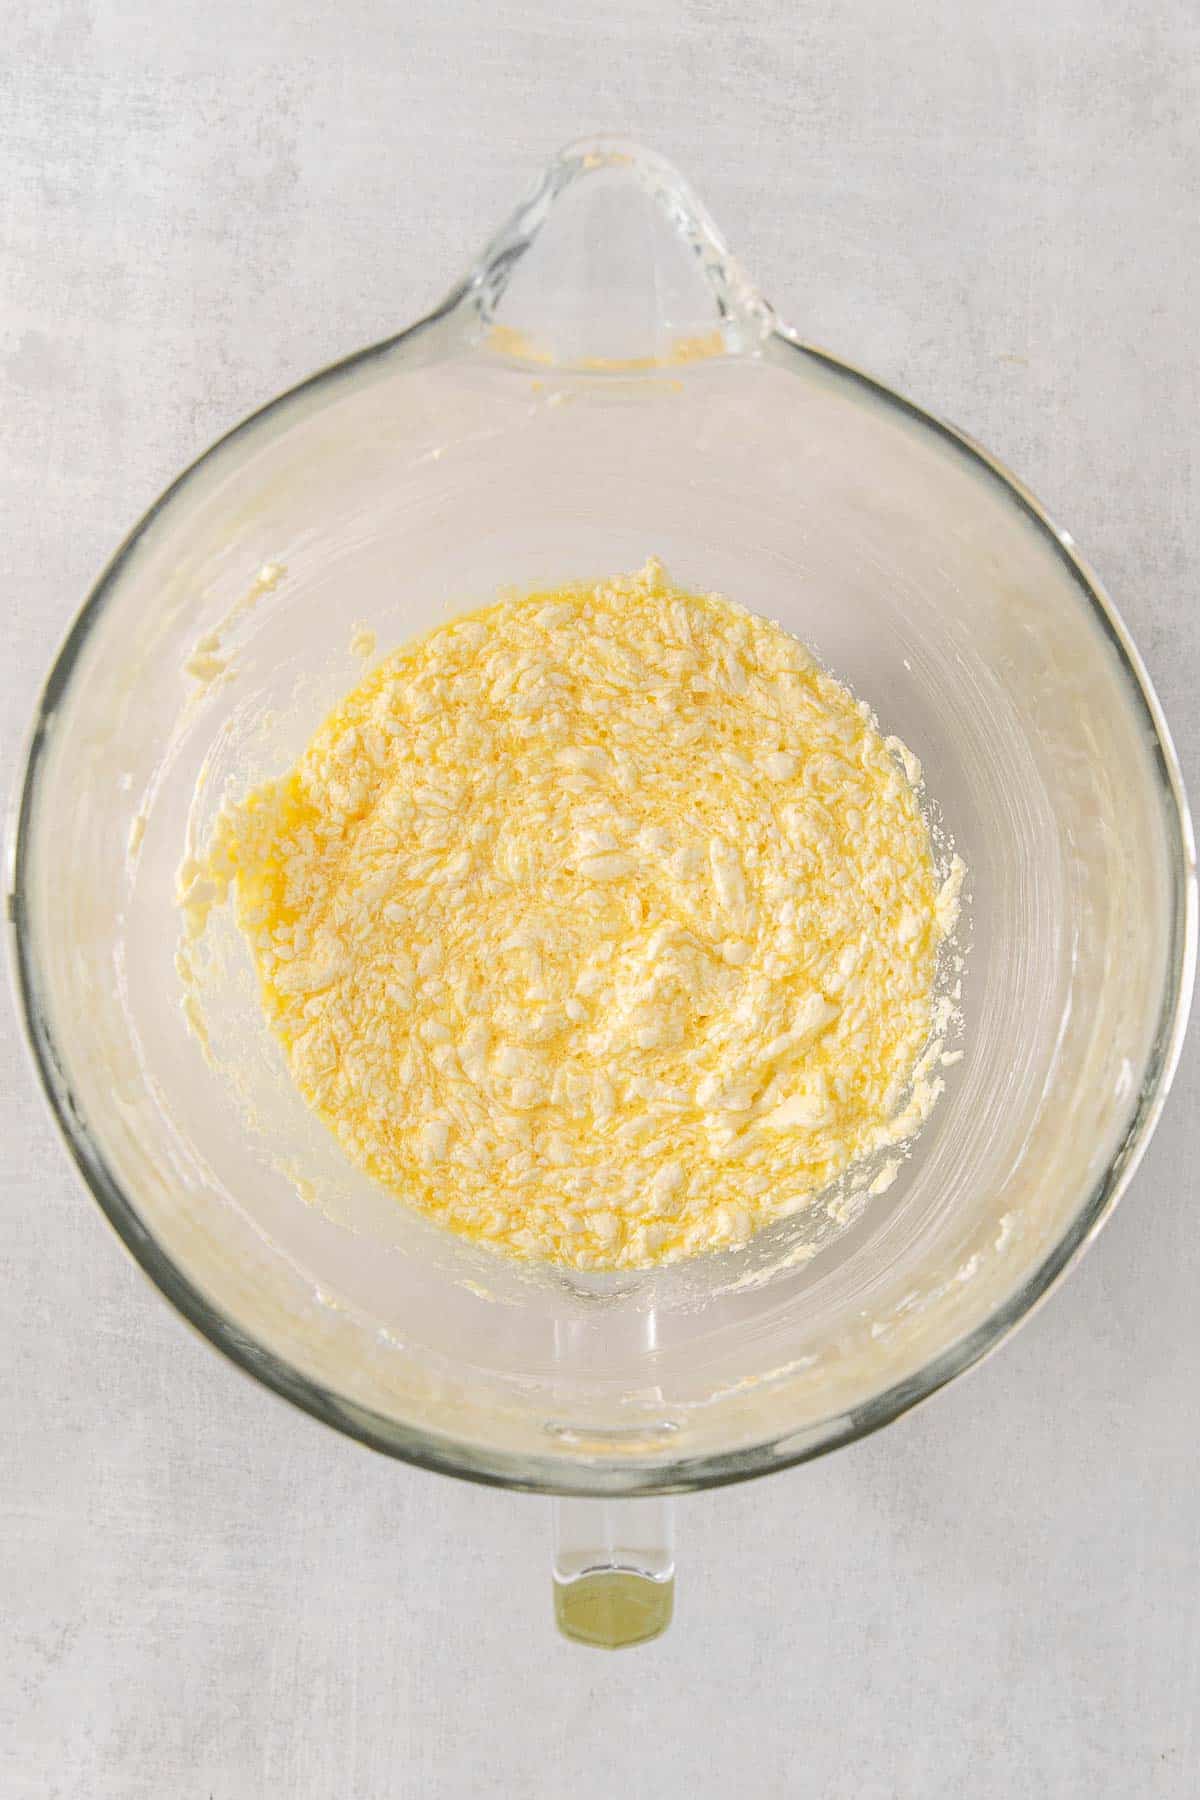 Glass mixing bowl with butter mixture.